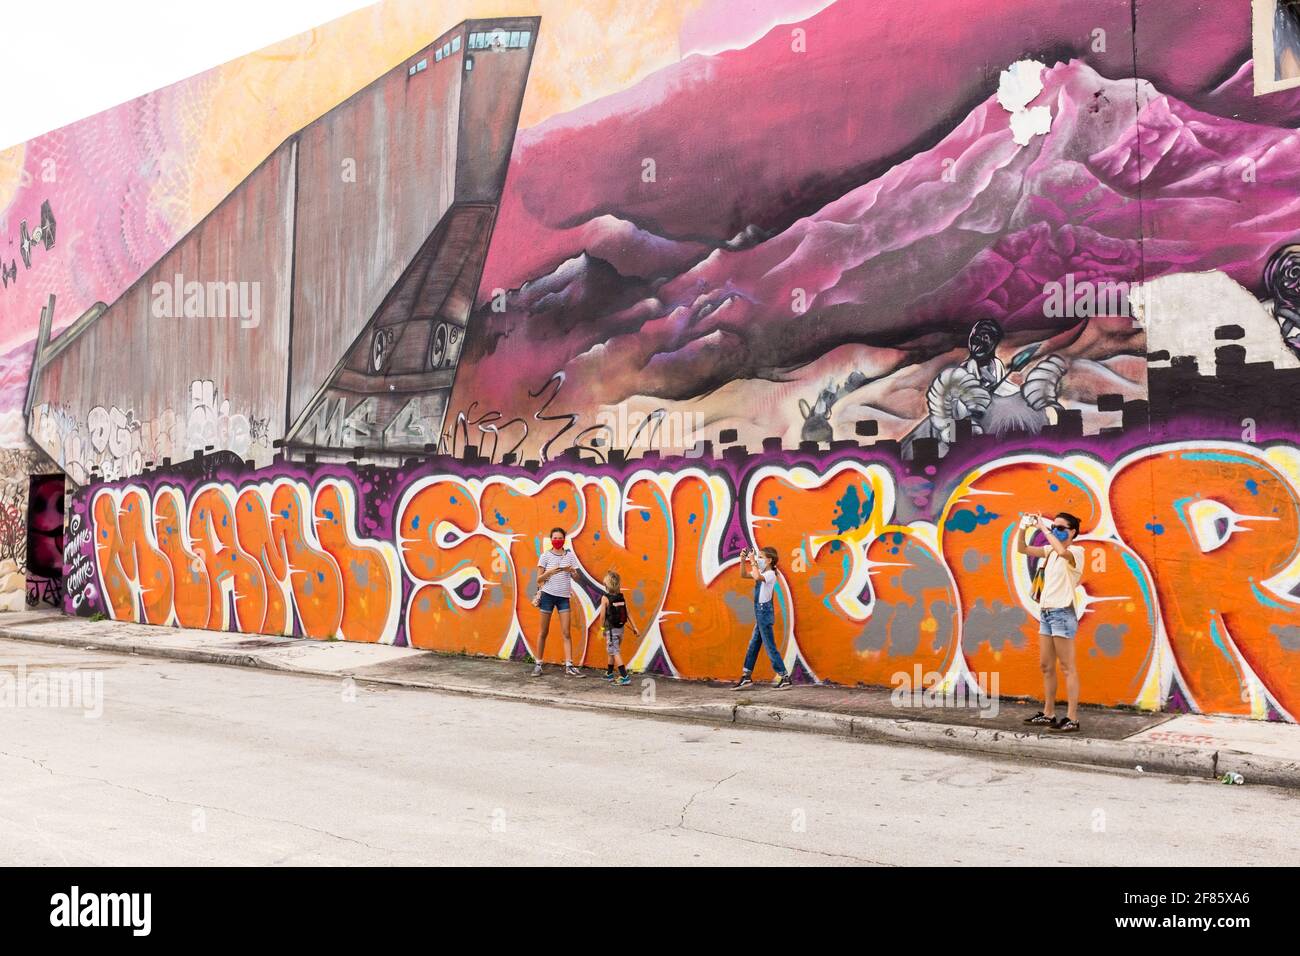 A family stands by a wall covered in graffiti art in the Wynwood Art District, Miami, FLorida, USA Stock Photo